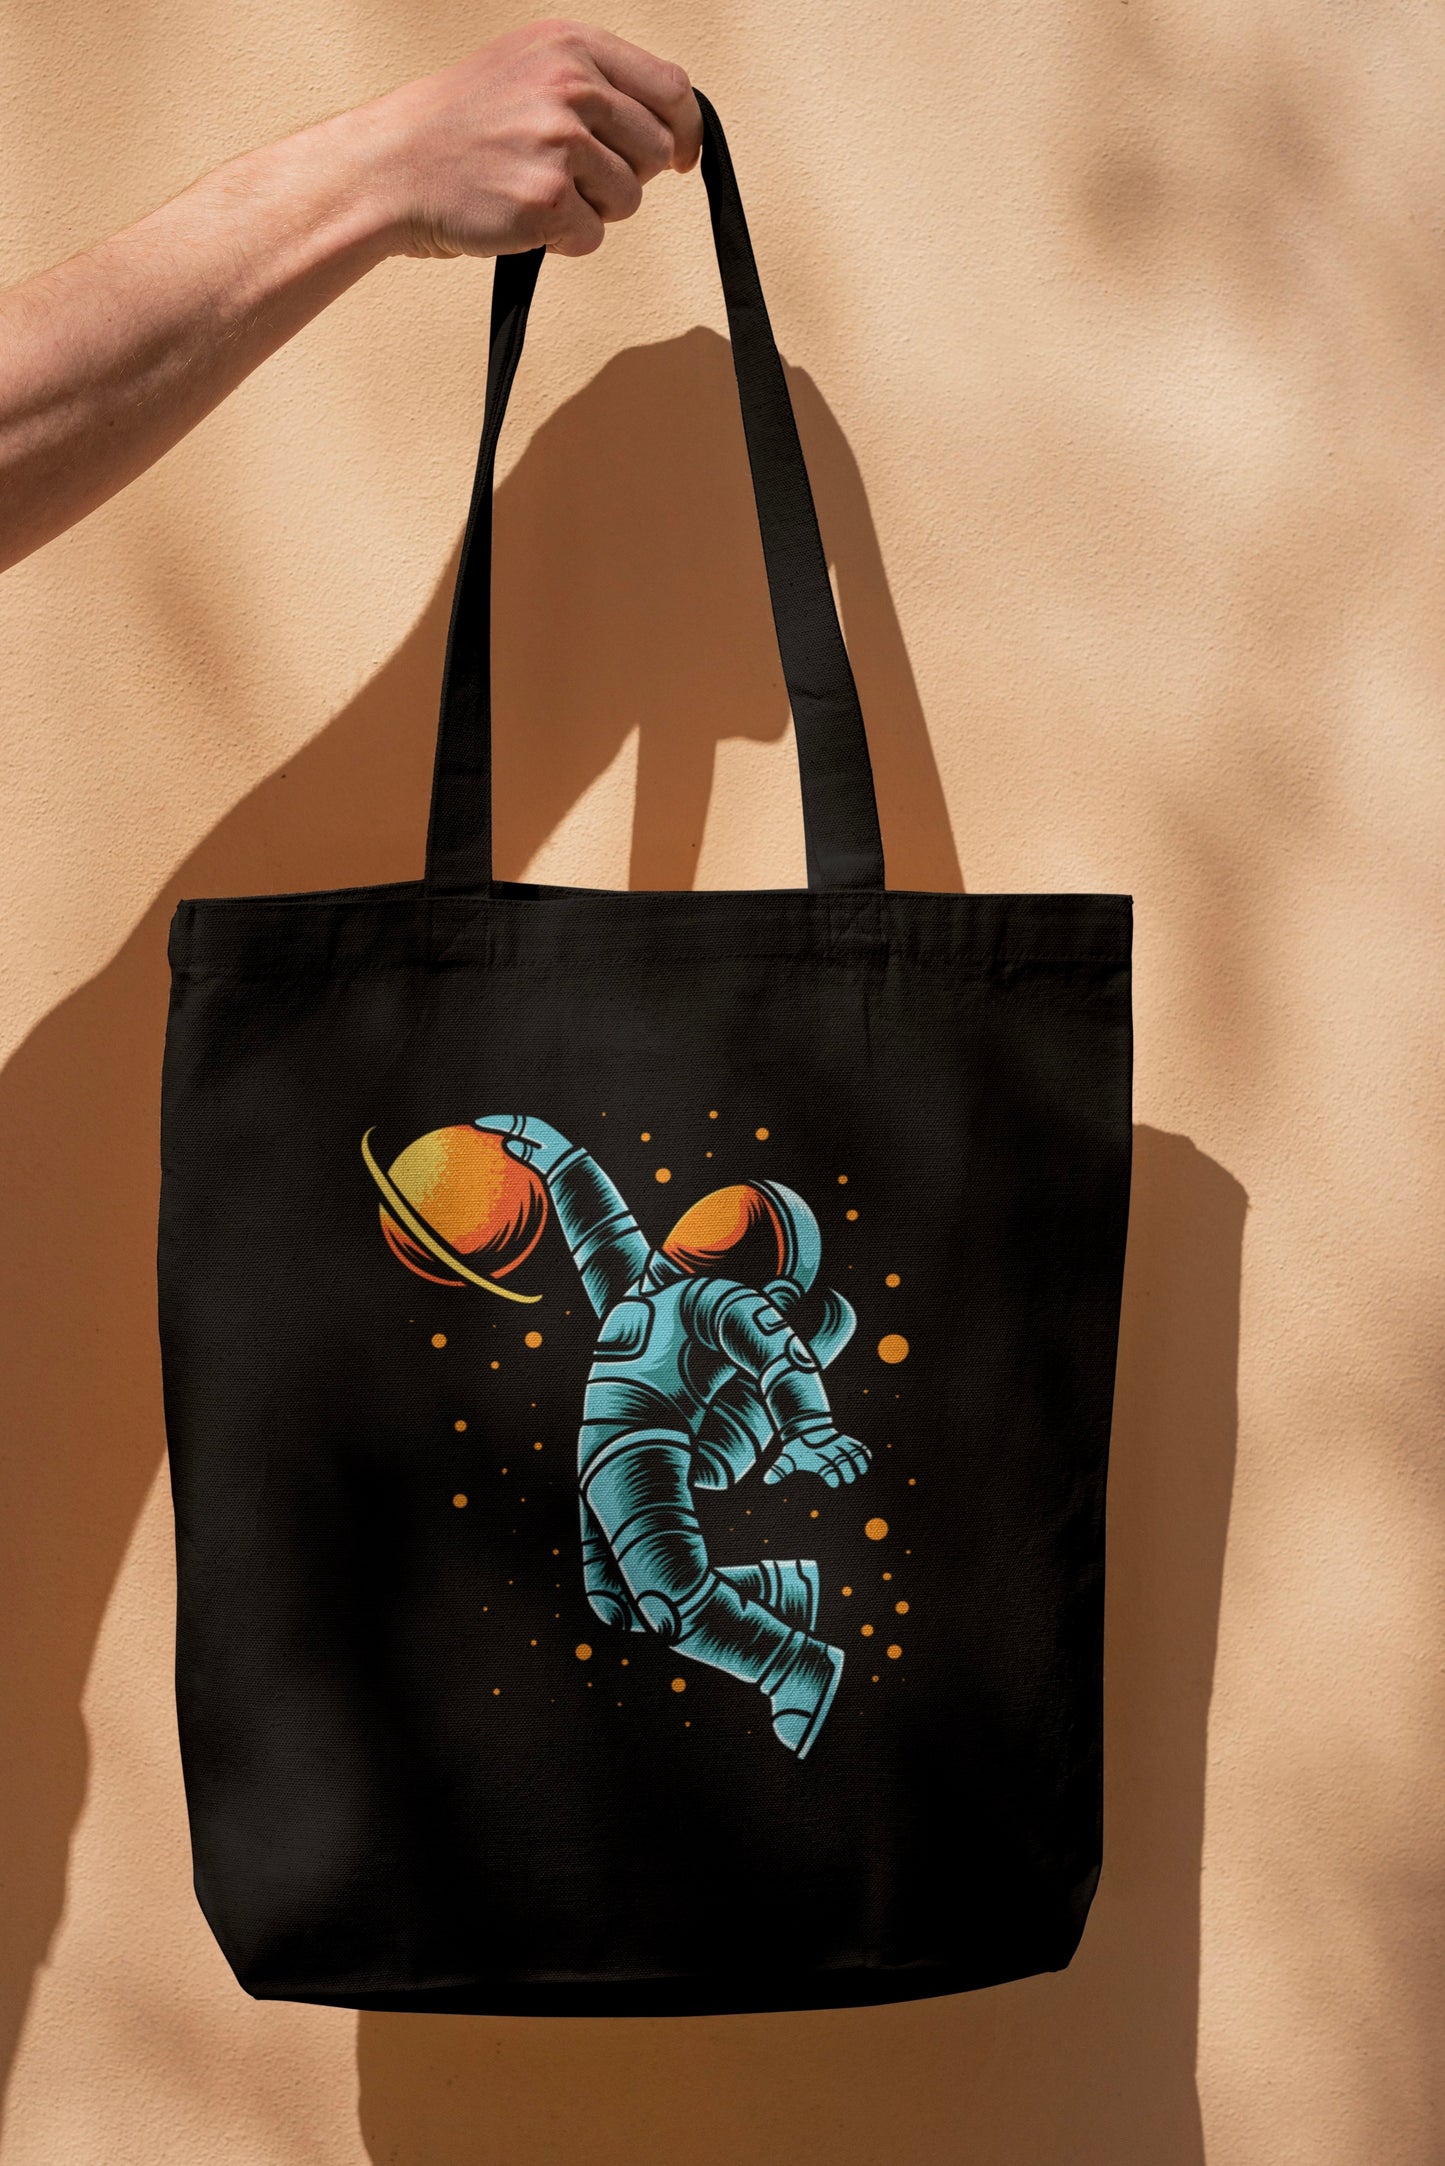 Black/White Flying Astronaut Tote Bag with Zipper